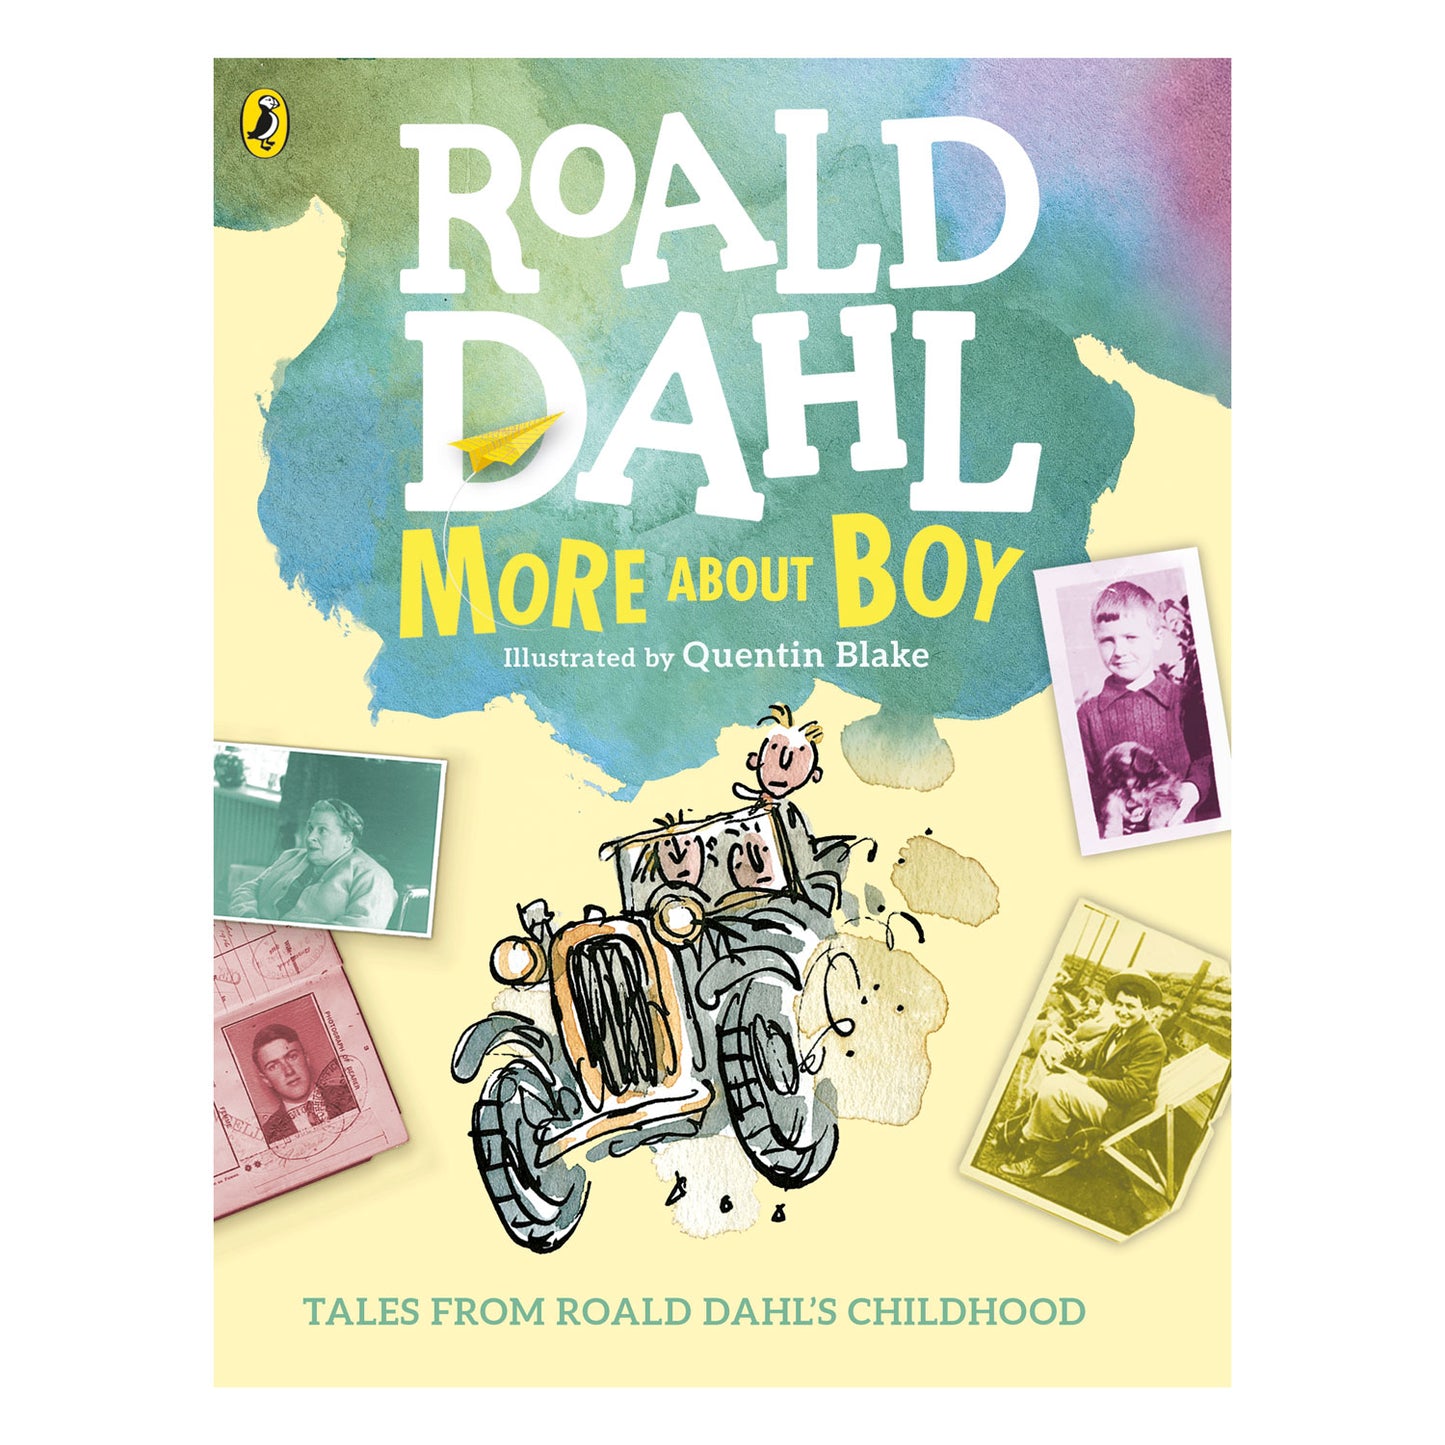 More About Boy by Roald Dahl with illustrations by Quentin Blake